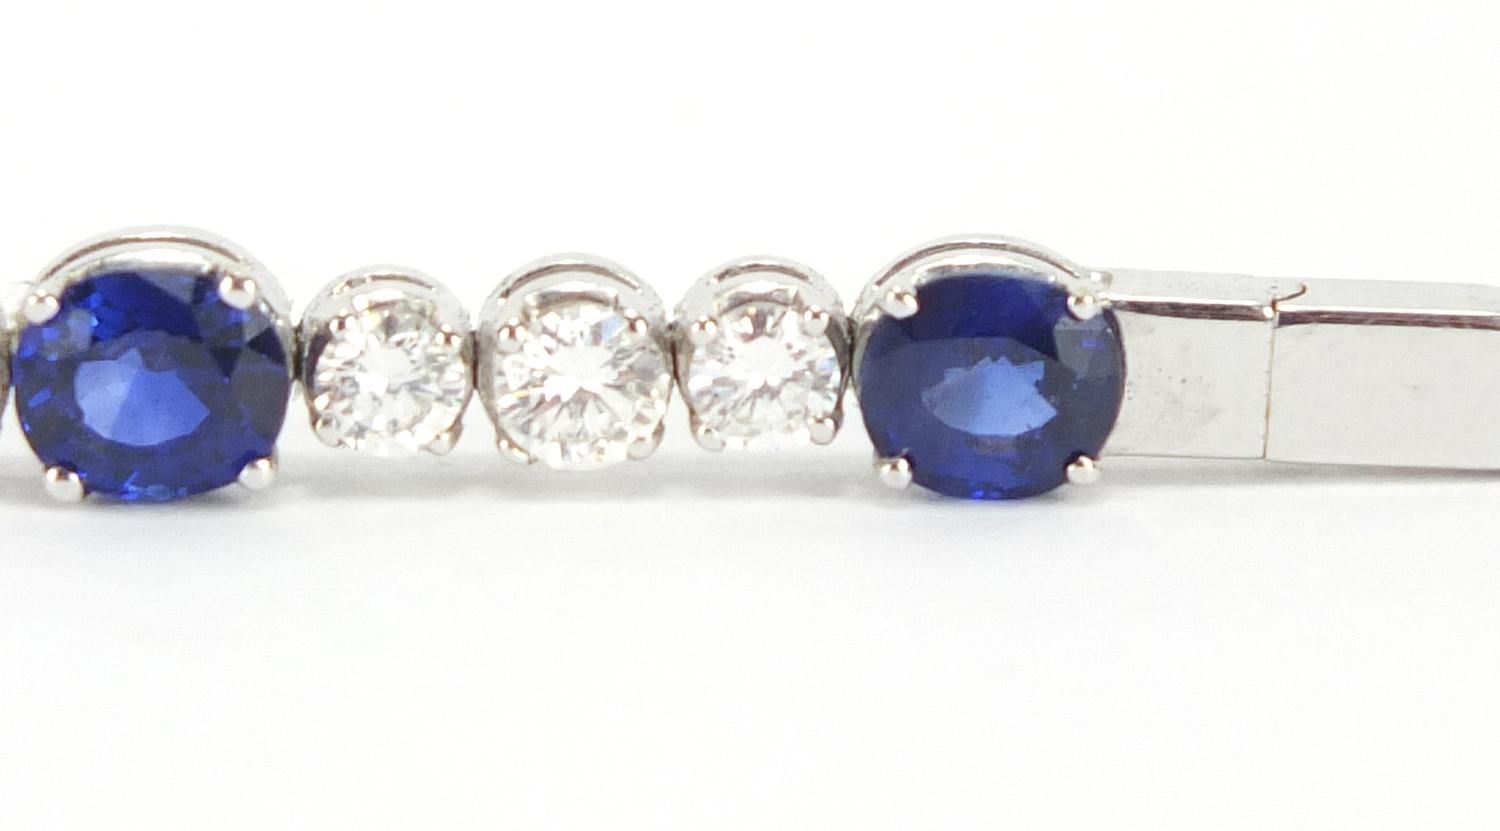 18ct white gold graduated Sapphire and Diamond bracelet, 18cm in length, approximate weight 13.9g - Image 6 of 10